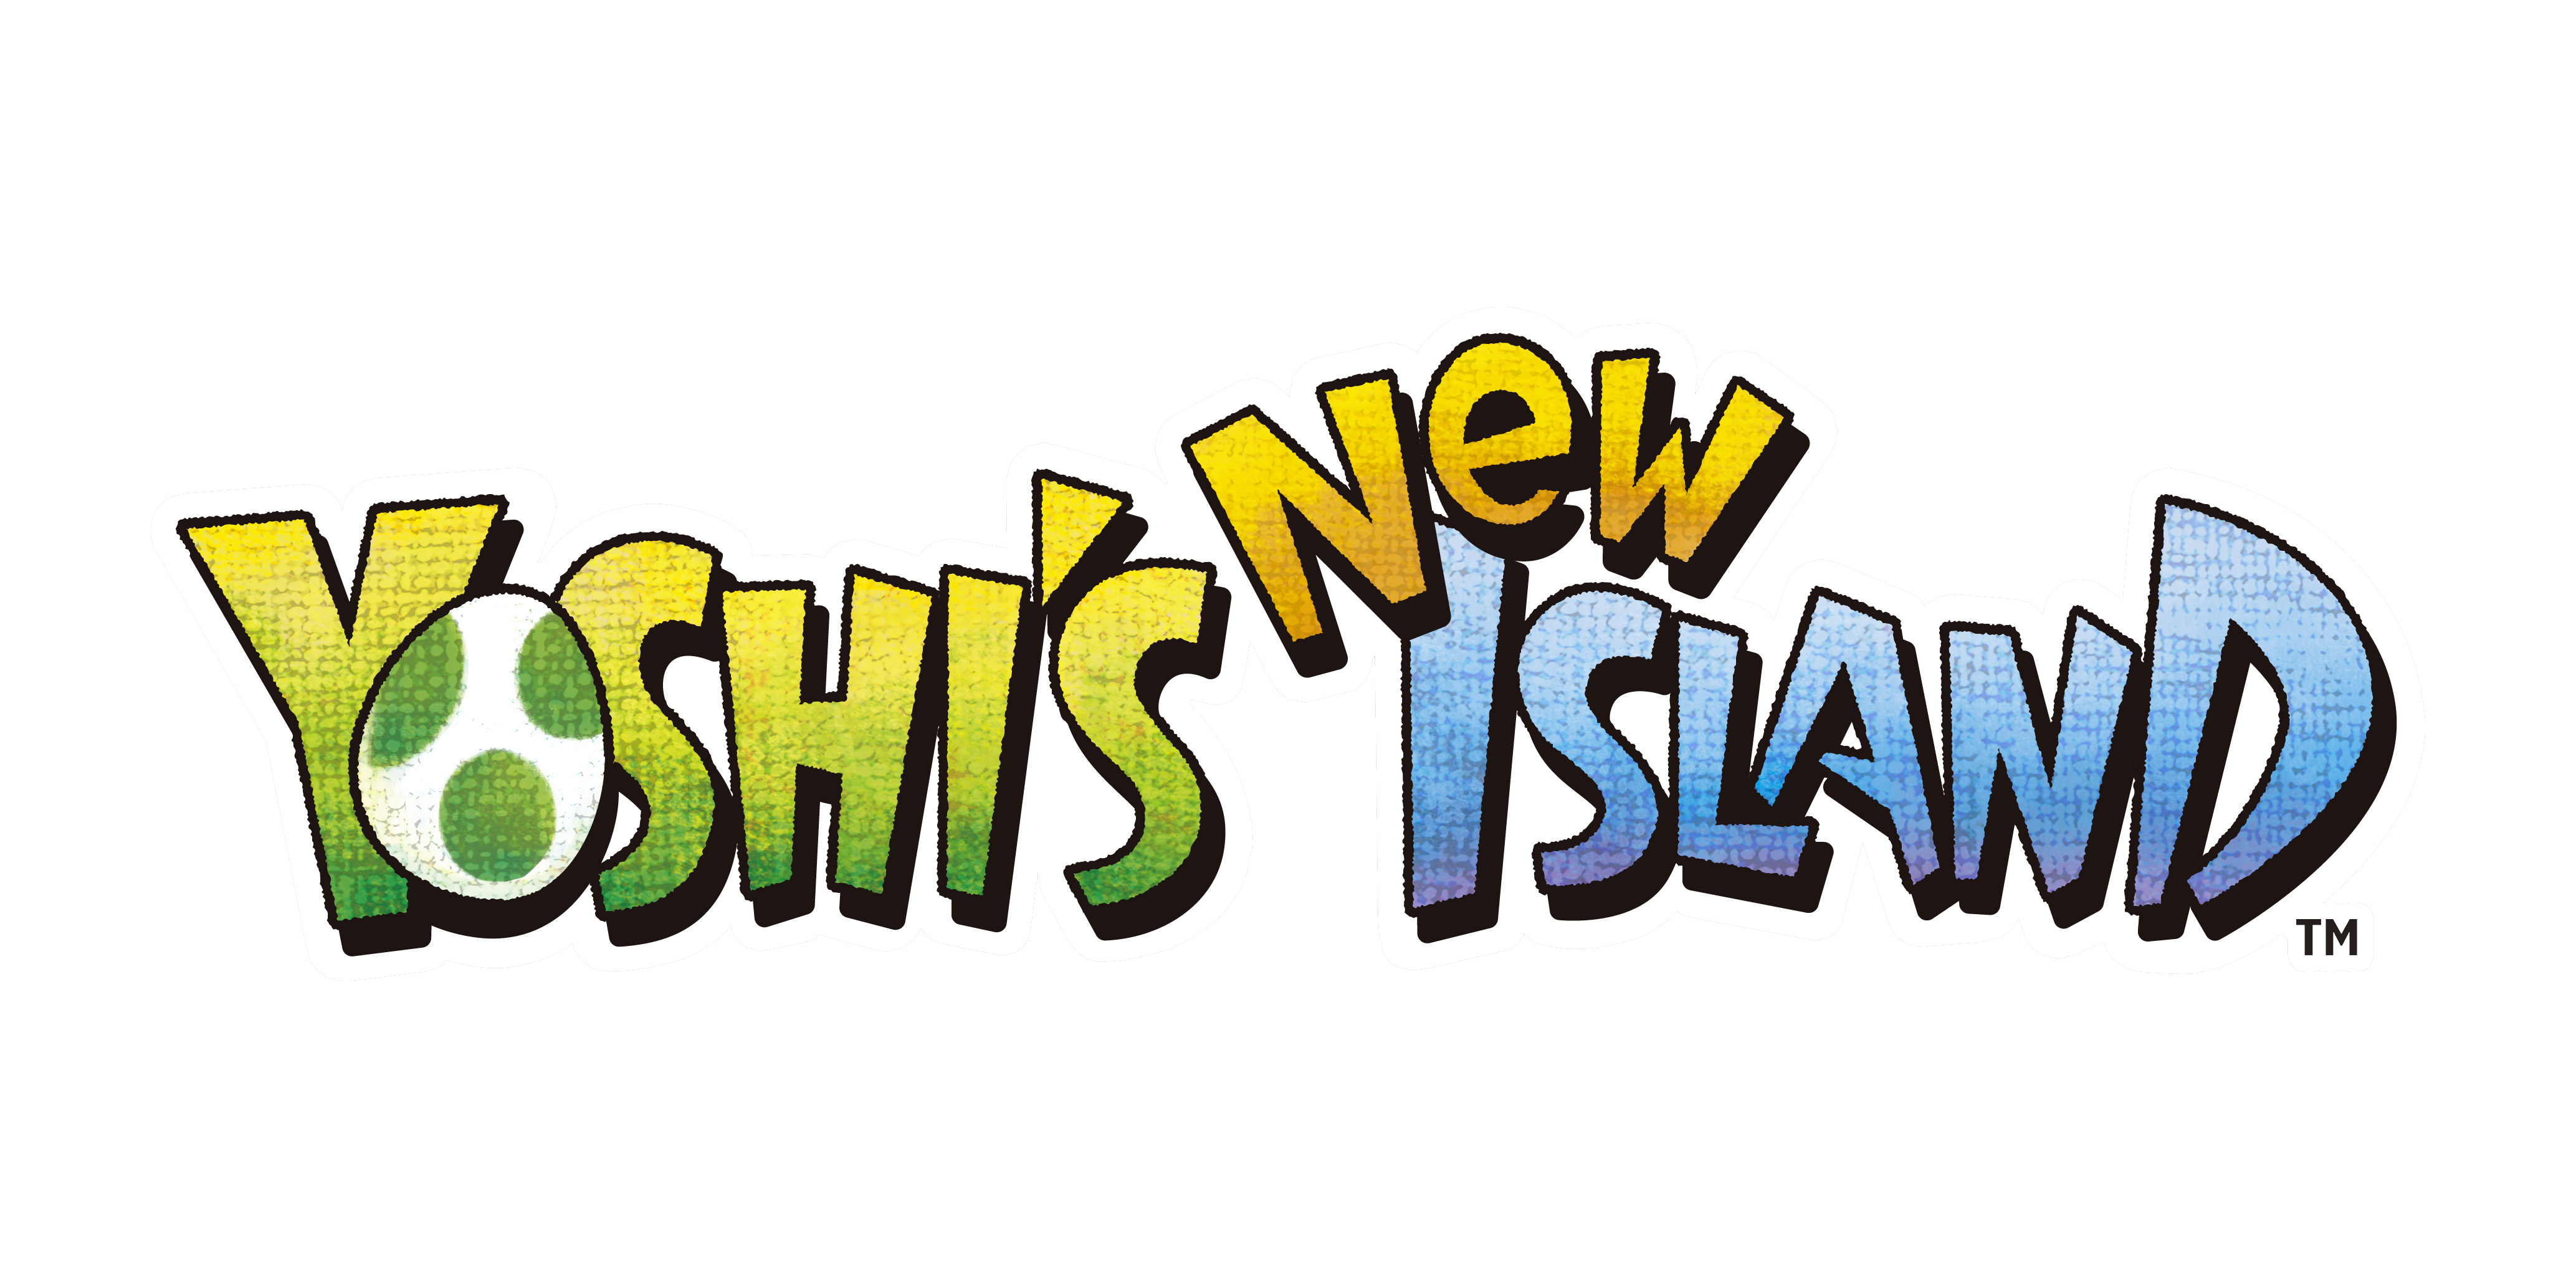 Video Game Yoshi's New Island HD Wallpaper | Background Image